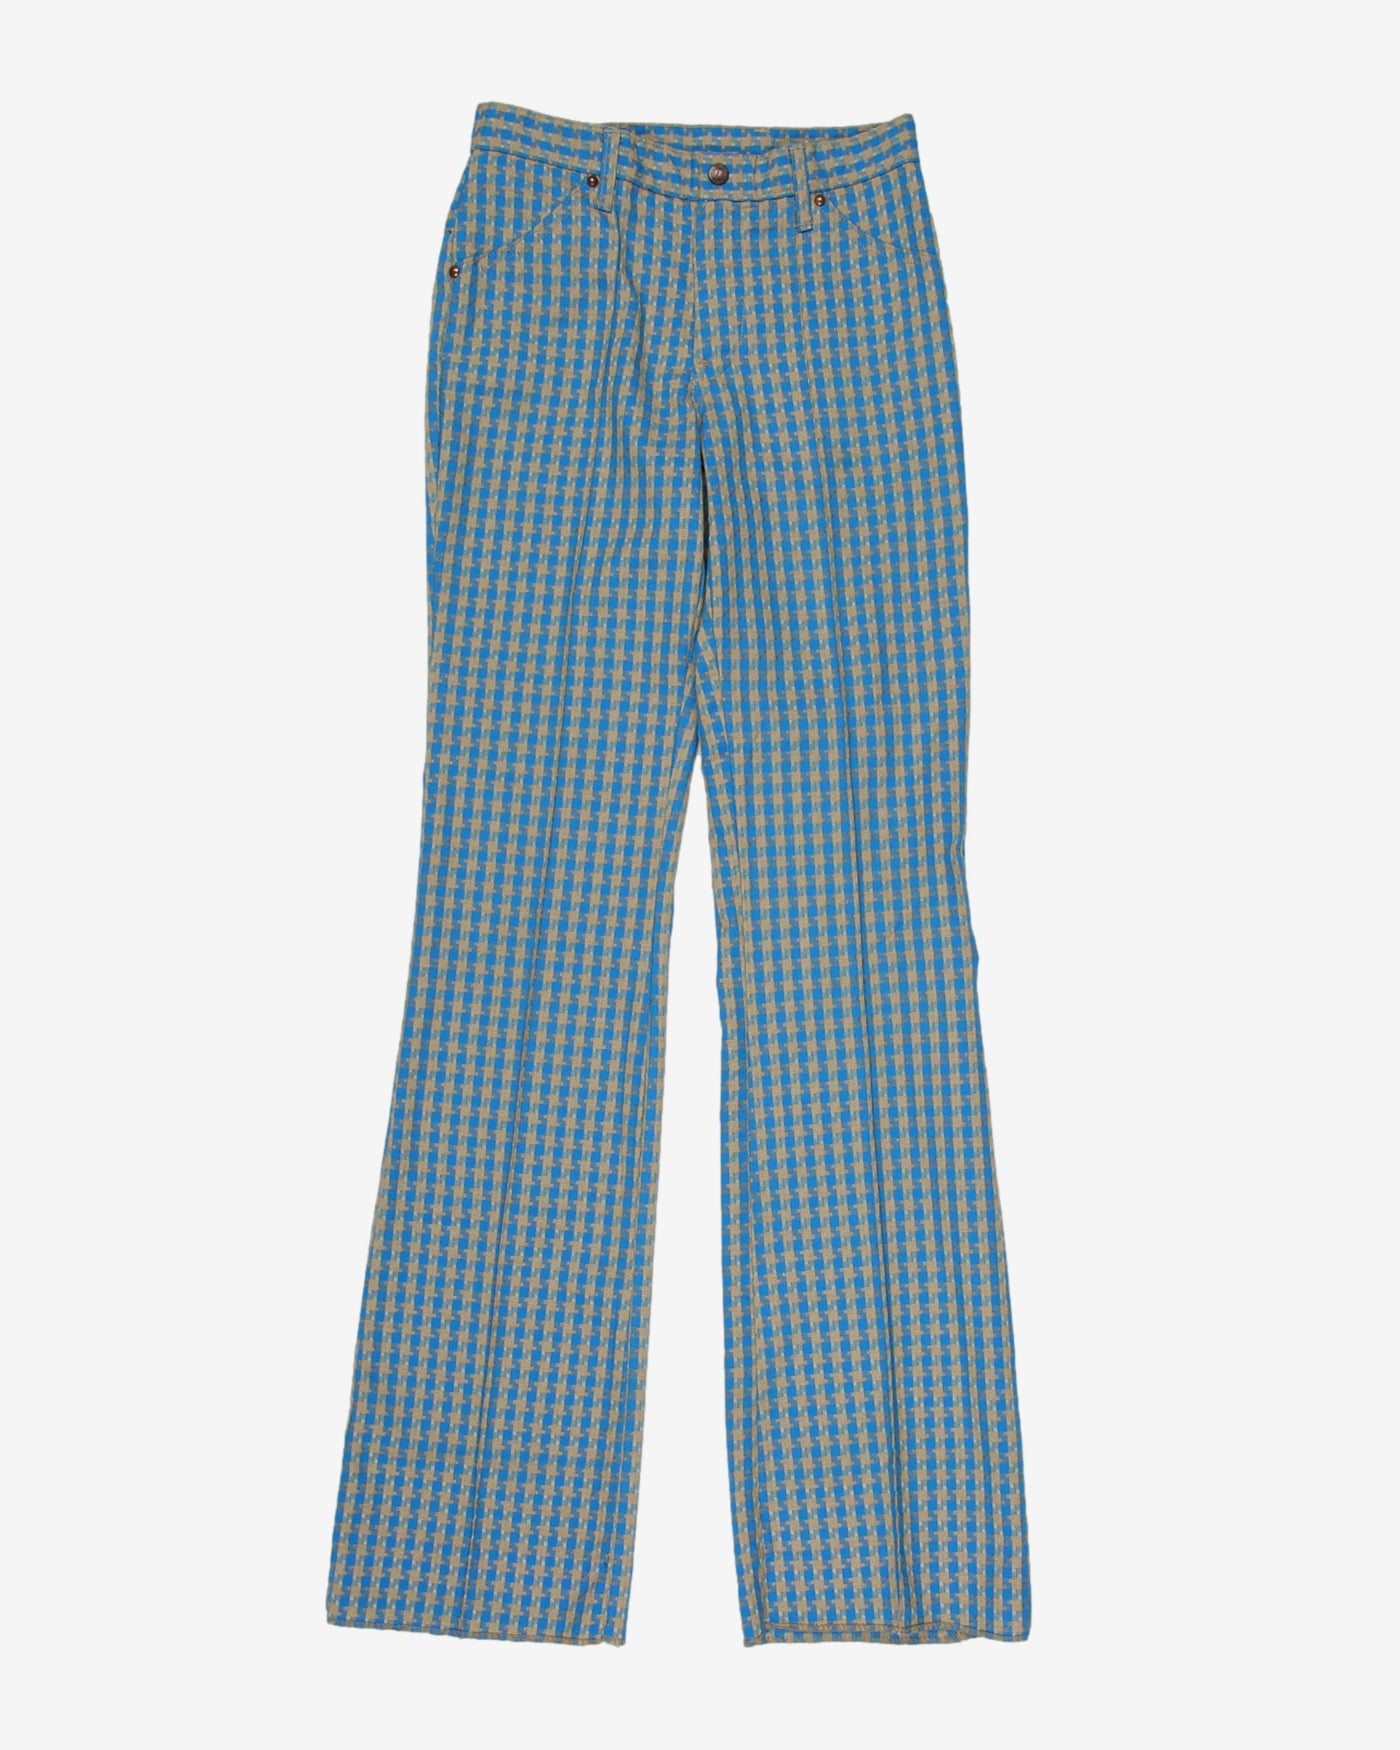 H Bar C Vintage 70s Blue Patterned High Waist Straight Trousers - W26 L35